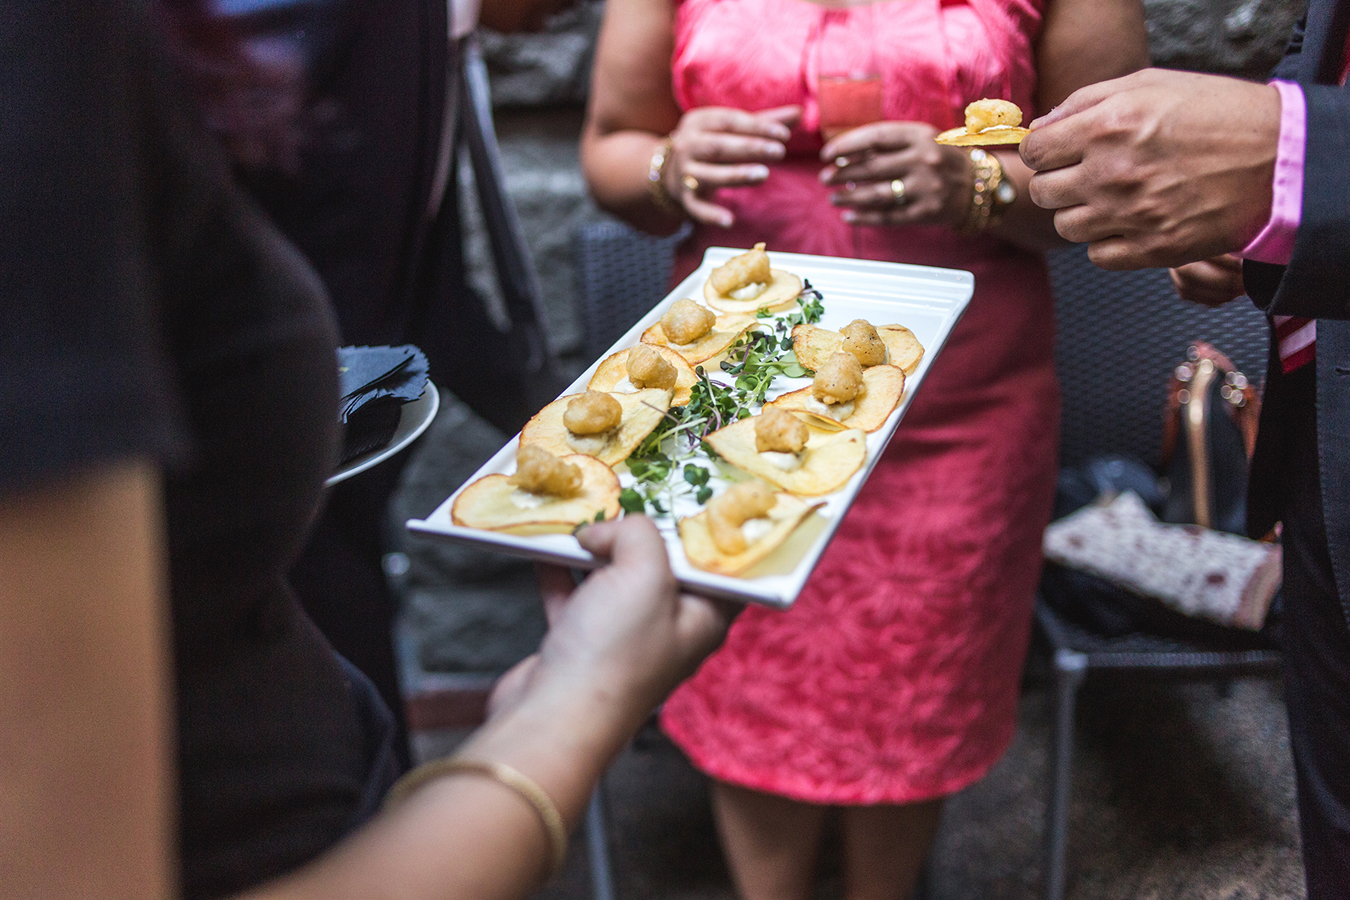 Fish and chip appetizers are handed out during the cocktail hour at a wedding in Yaletown